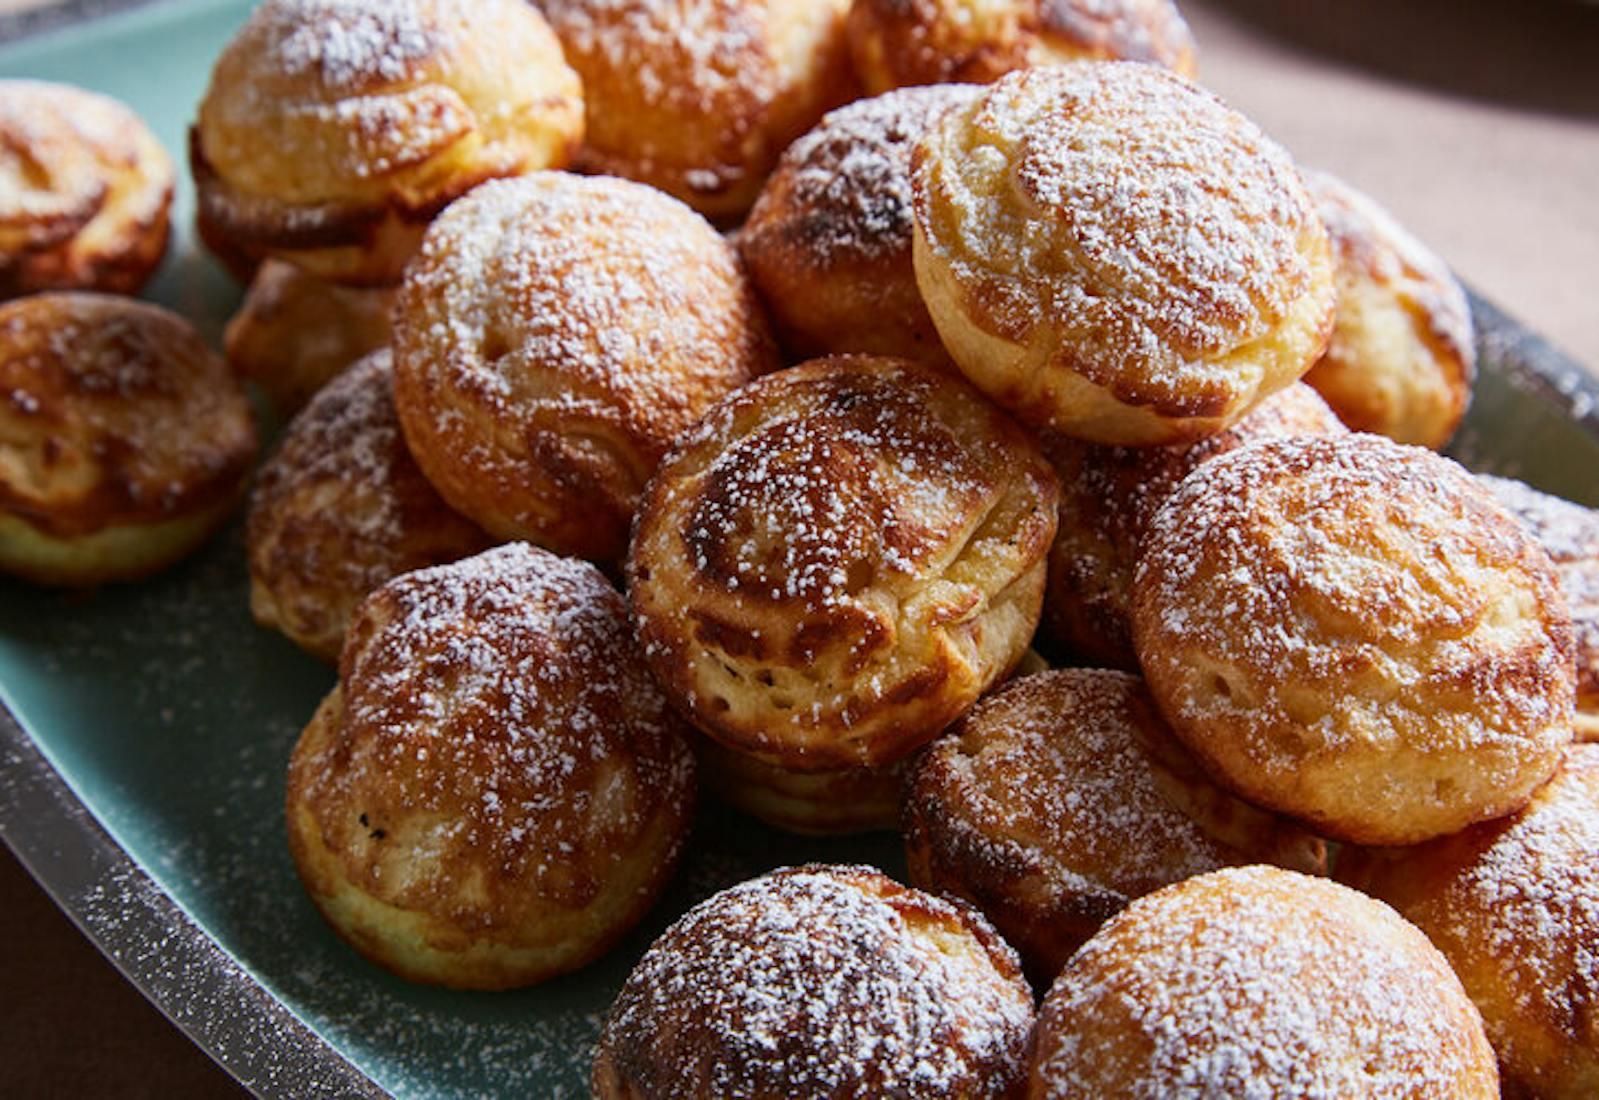 Doughnuts sprinkled with powdered sugar on blue plate.